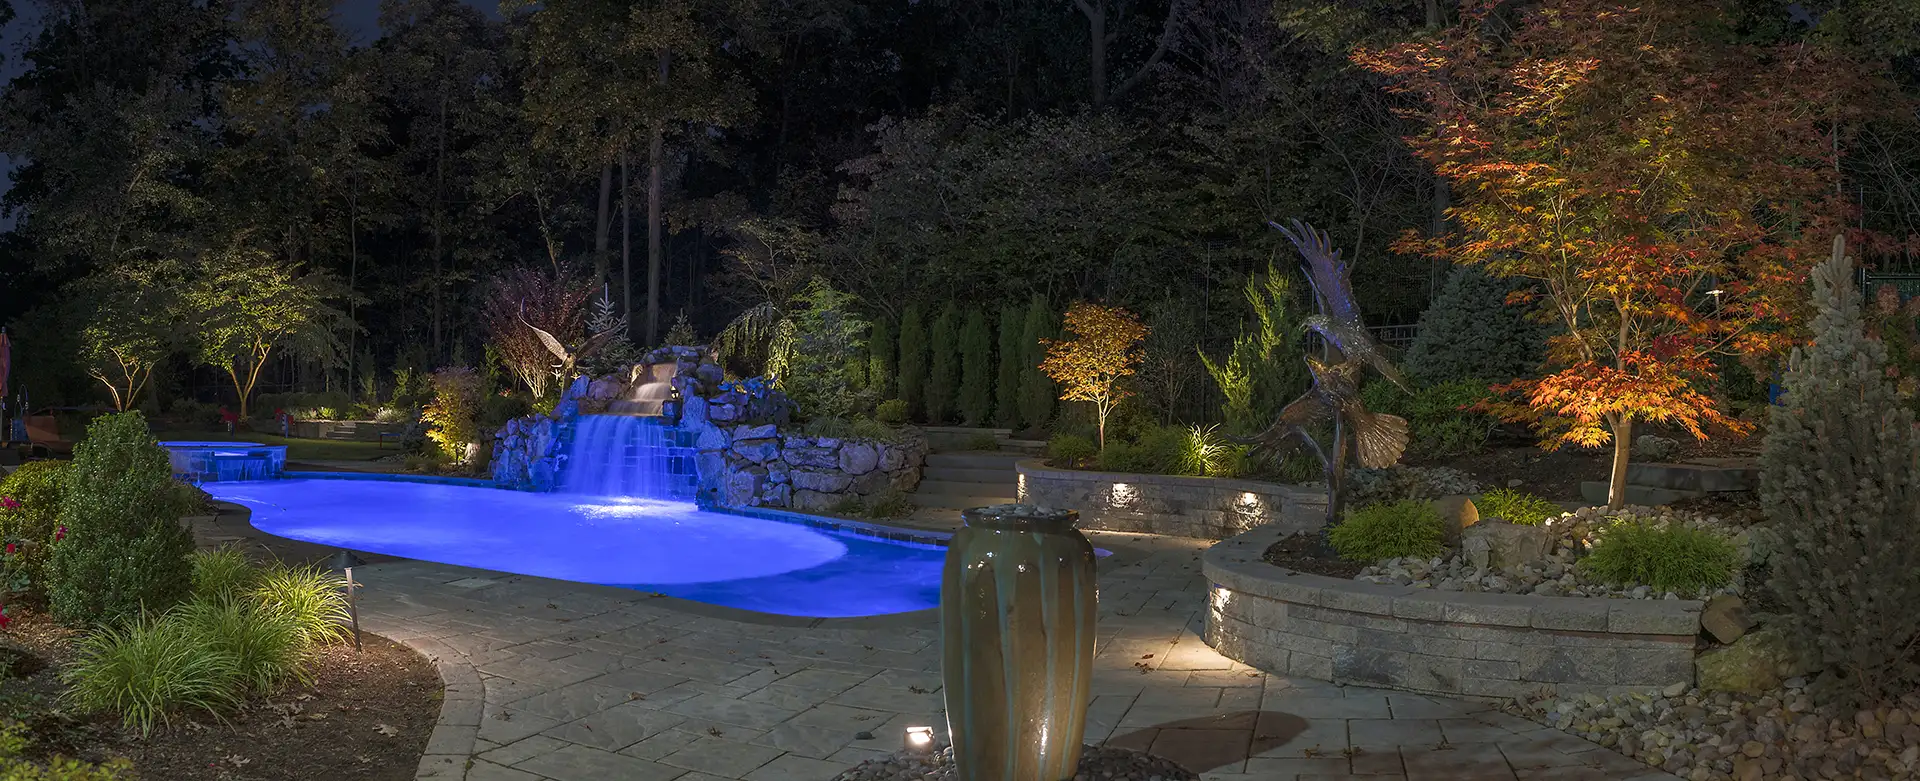 Corradino residence image 6 pool statuary Lighthouse Outdoor Lighting and Audio Northern New Jersey